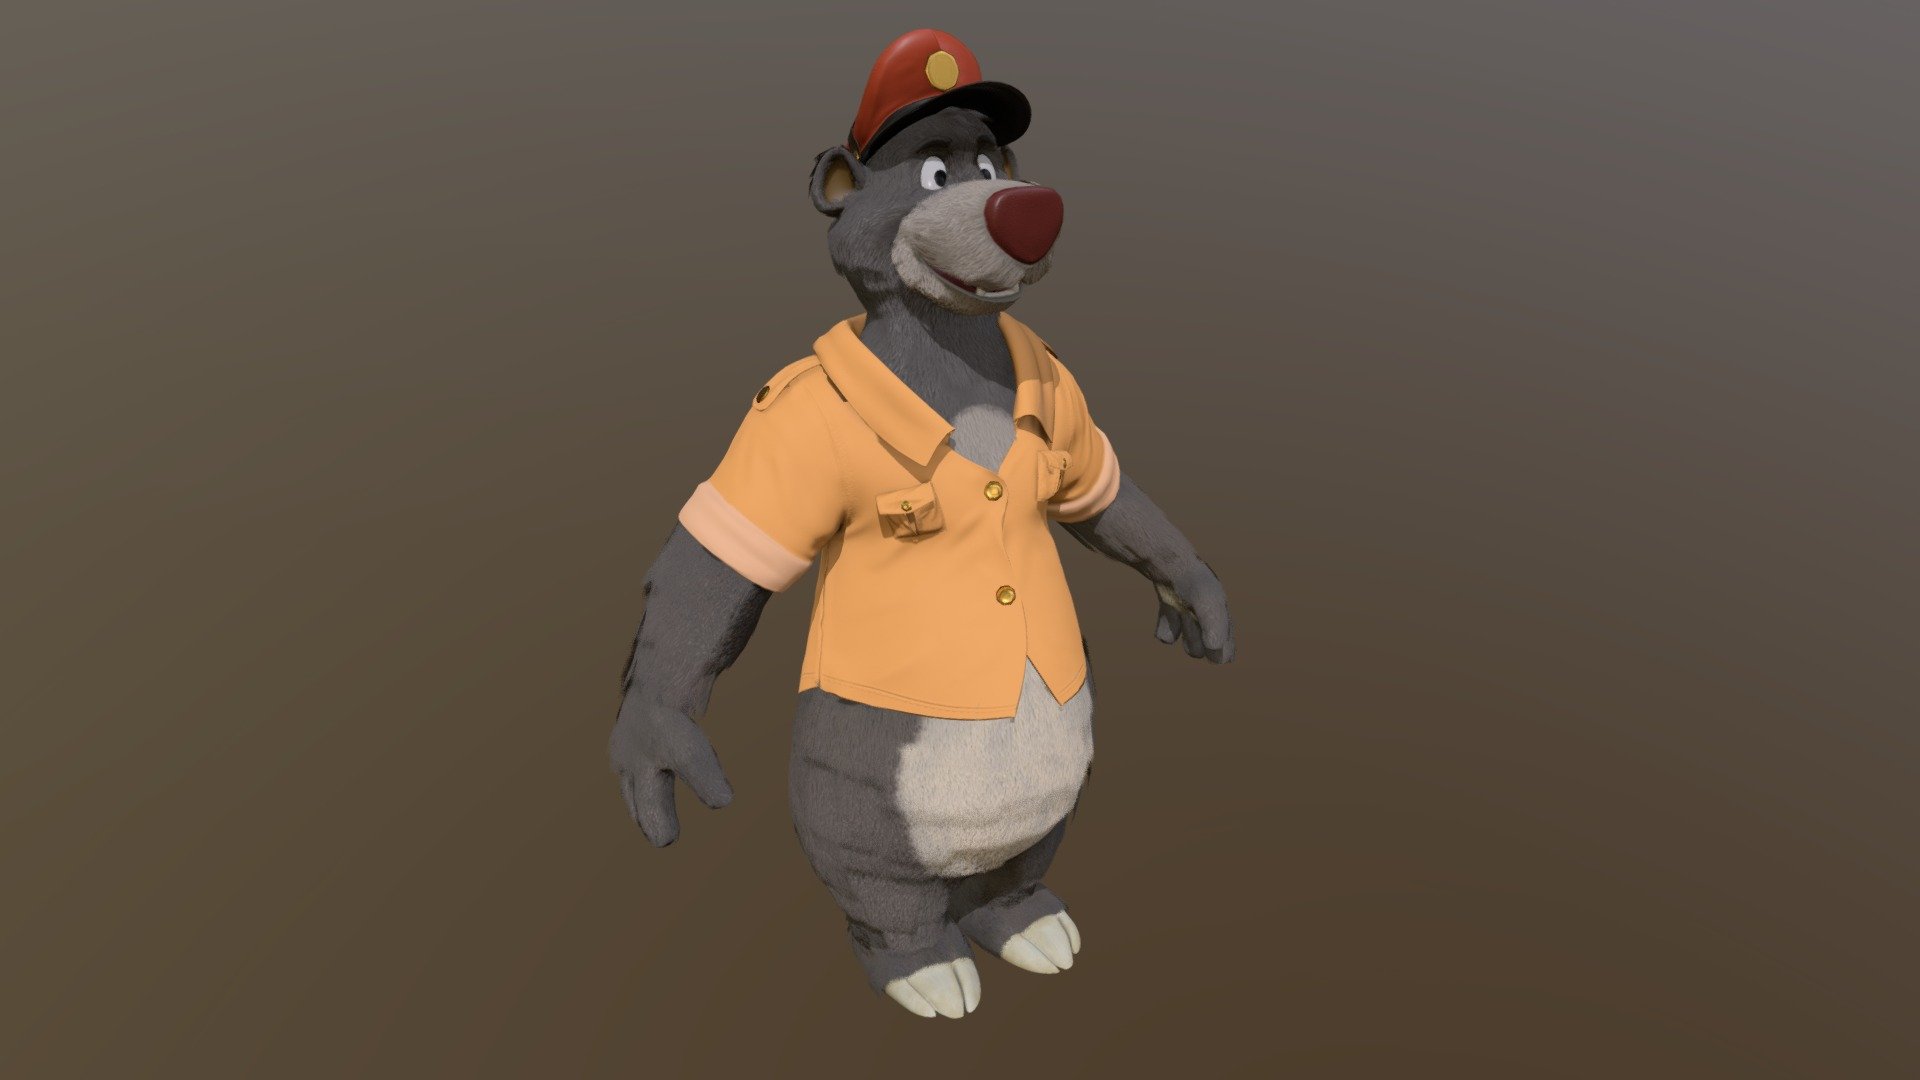 Baloo from Tale Spin
Game model
45 K tris

This character i a propriety of Disney.

Model for study purposes only - Baloo - Low poly - 3D model by Rocky (@RockNBurn) 3d model